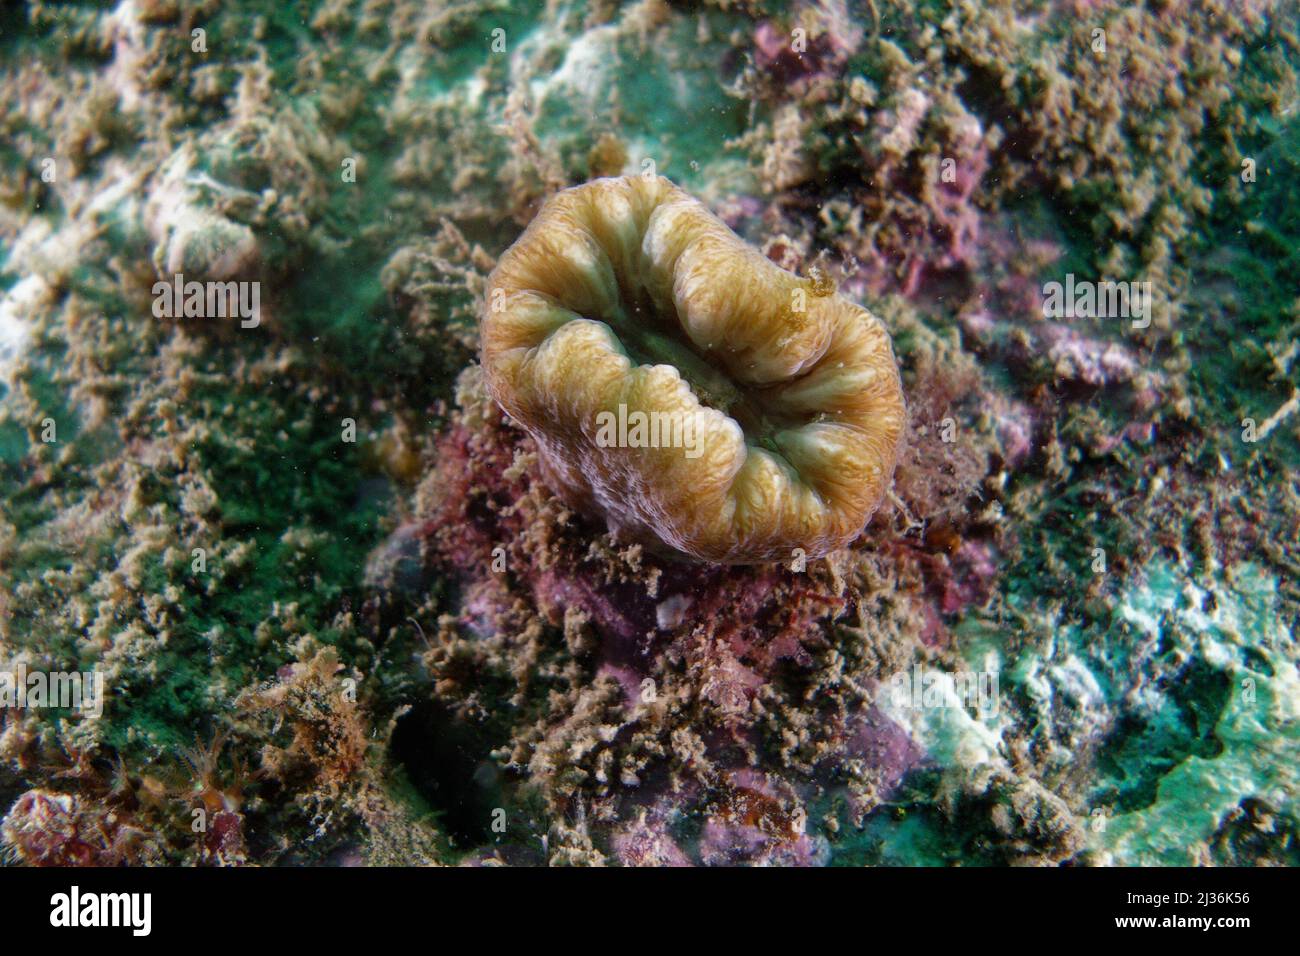 Scarlet coral or Pig-tooth coral (Balanophyllia europaea) in Mediterranean Sea Stock Photo